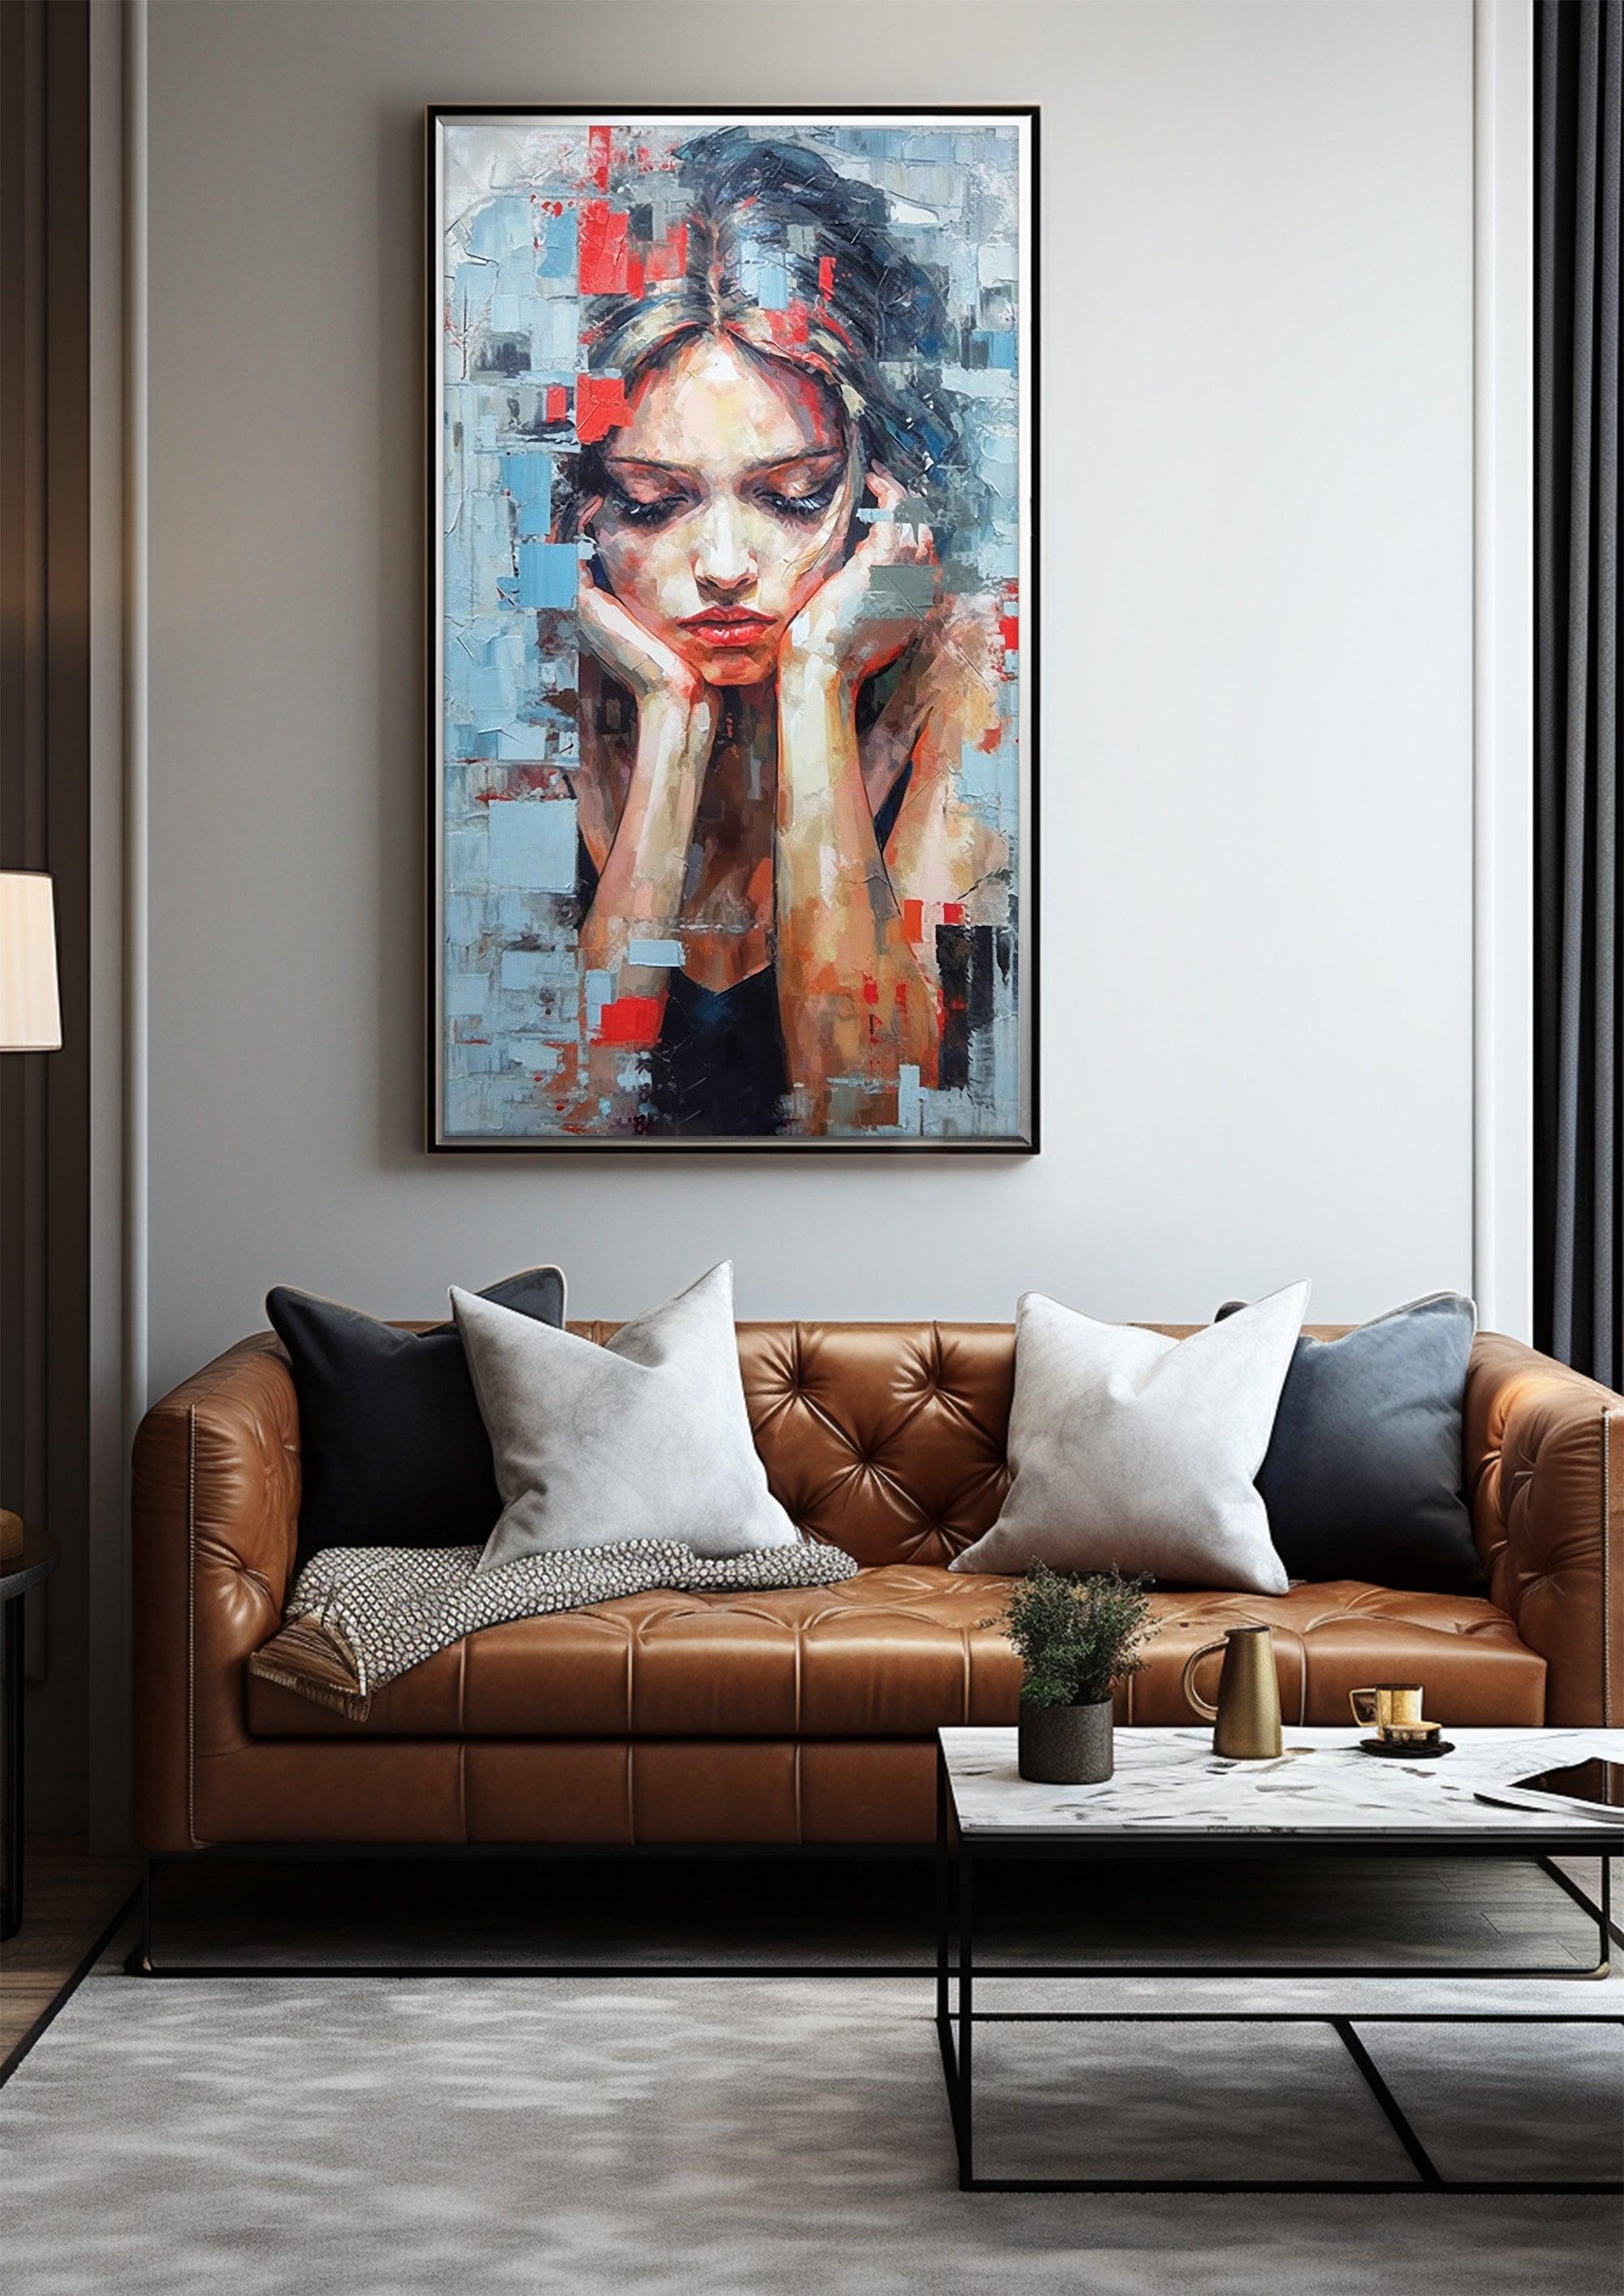 Woman Portrait，Hand Painted Colorful Decorative Canvas Artwork，Moody Wall Decor，Cotton Gloss Canvas Living Room Decor，High-Quality Waterproof Decorative Canvas Art